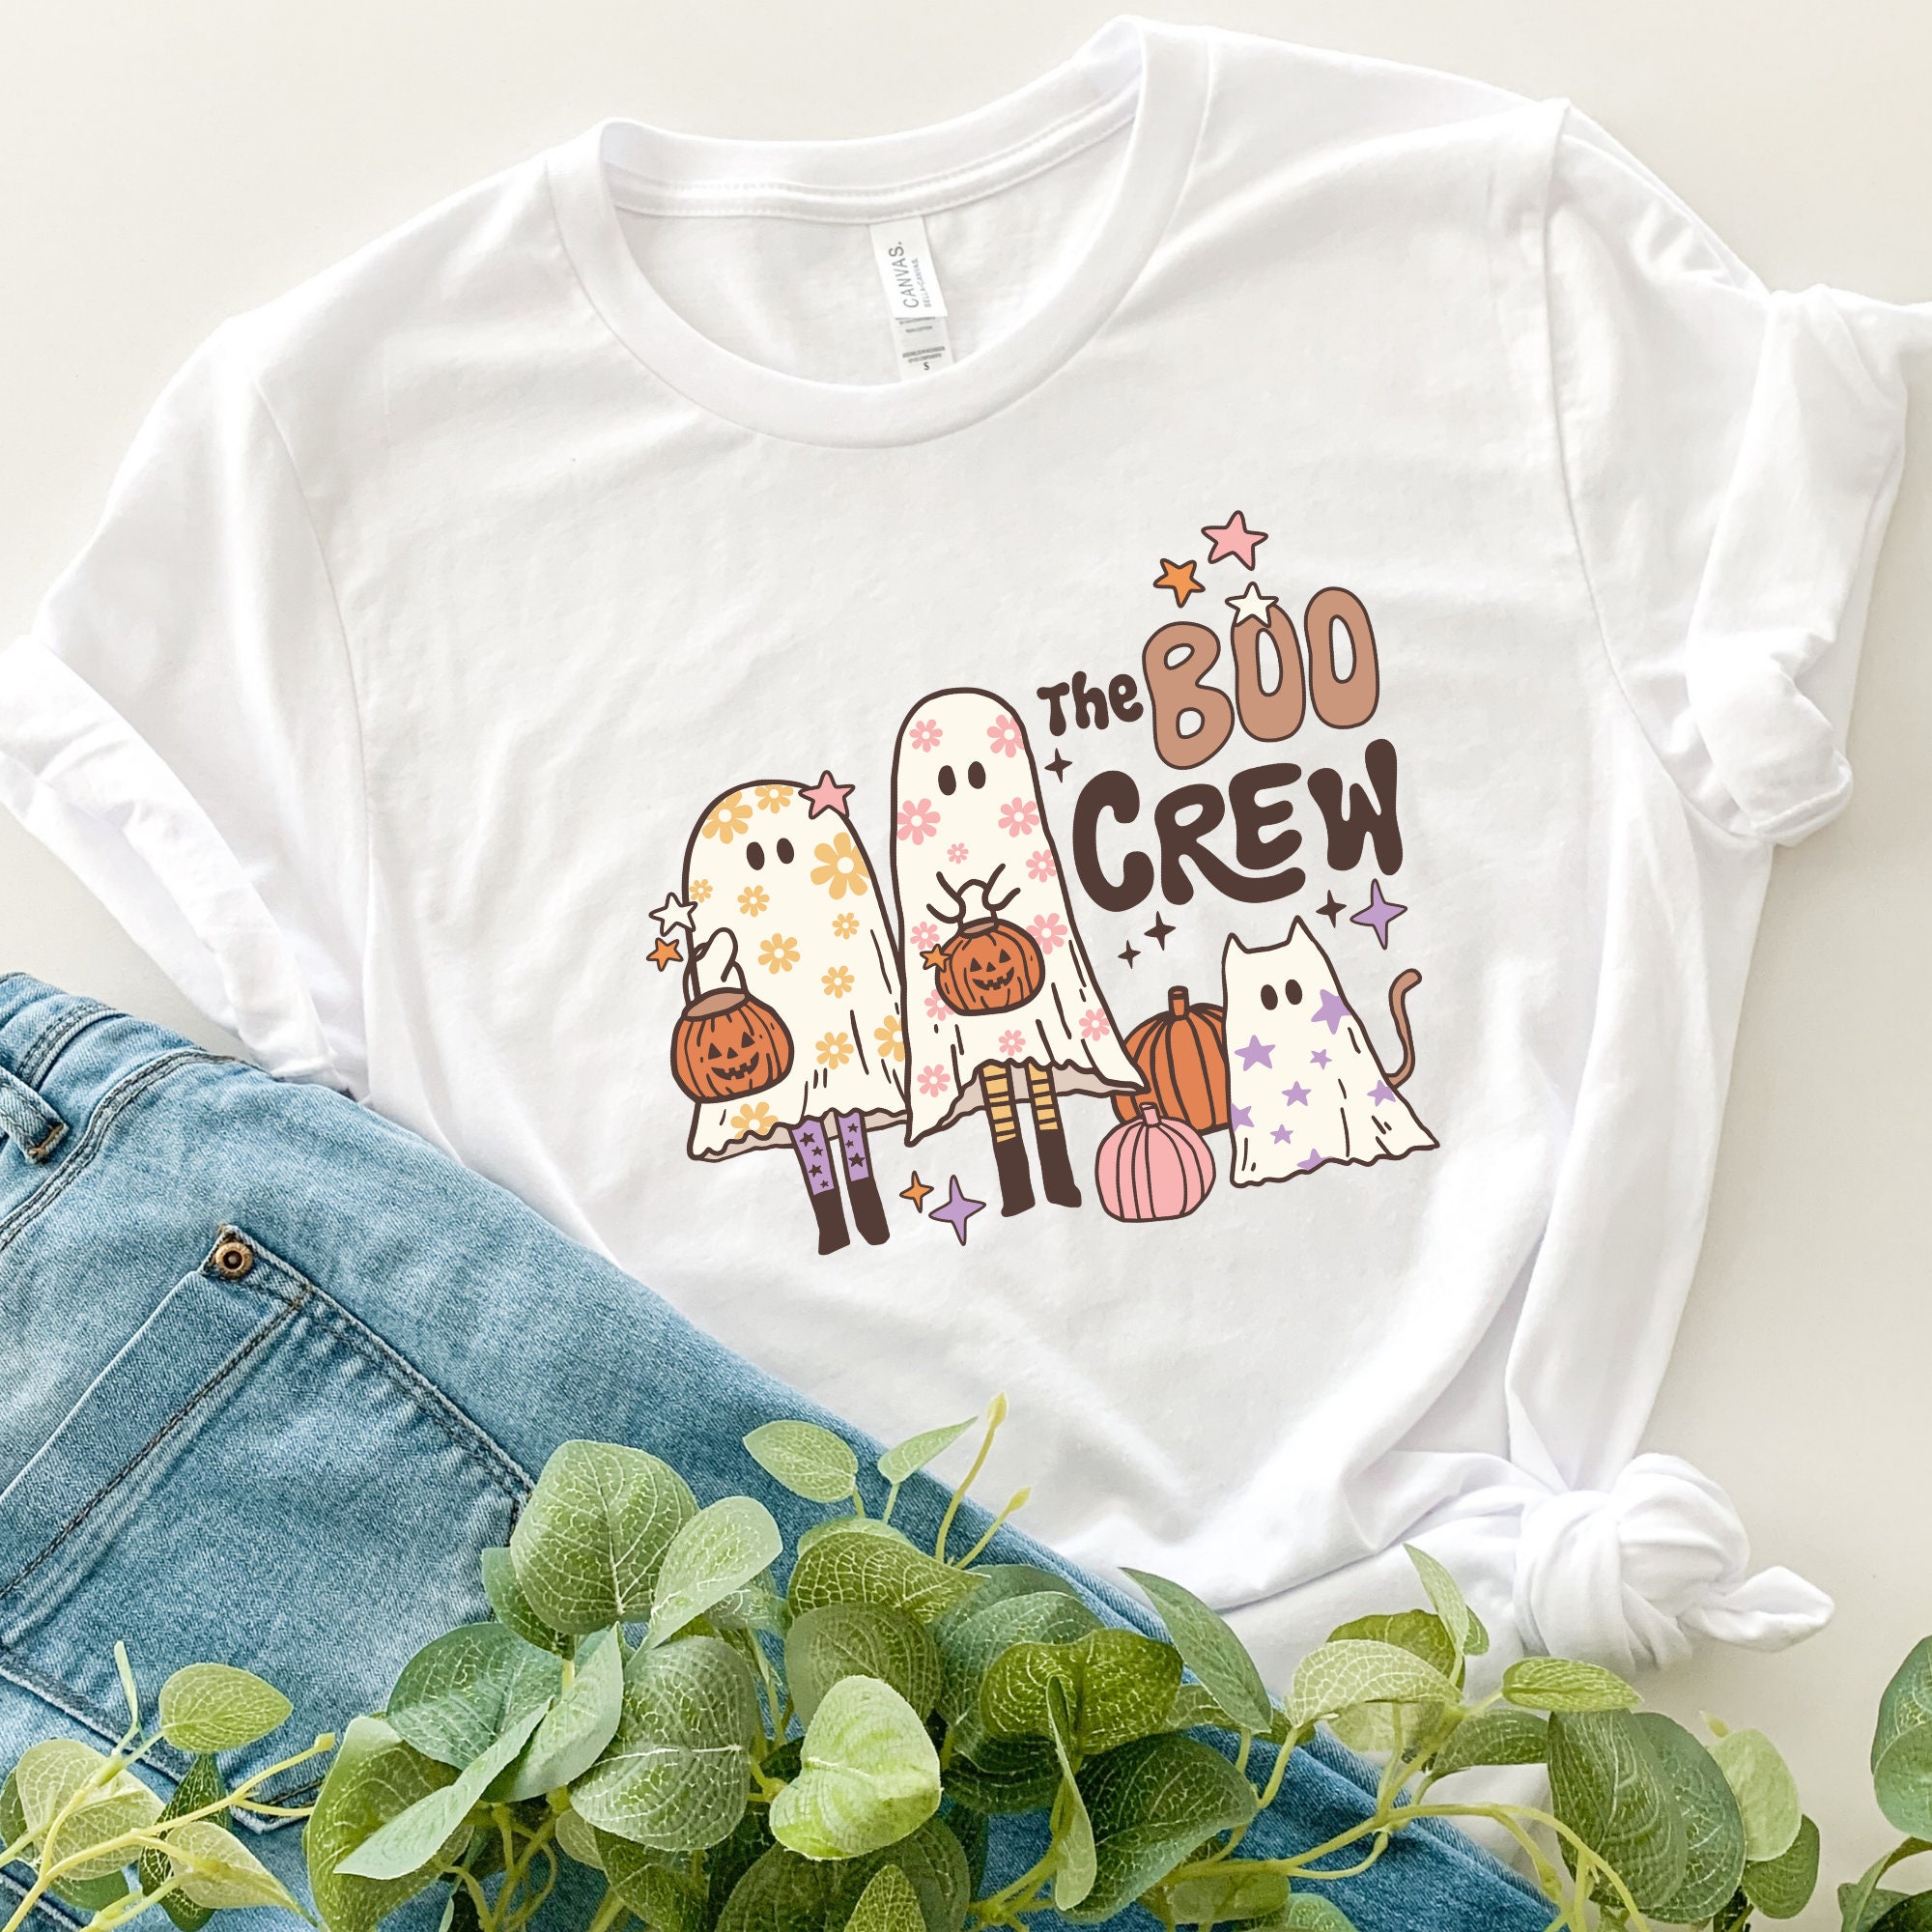 Discover The Boo Crew: Halloween Family Matching Shirt for Spooky Parties & Festive Gatherings